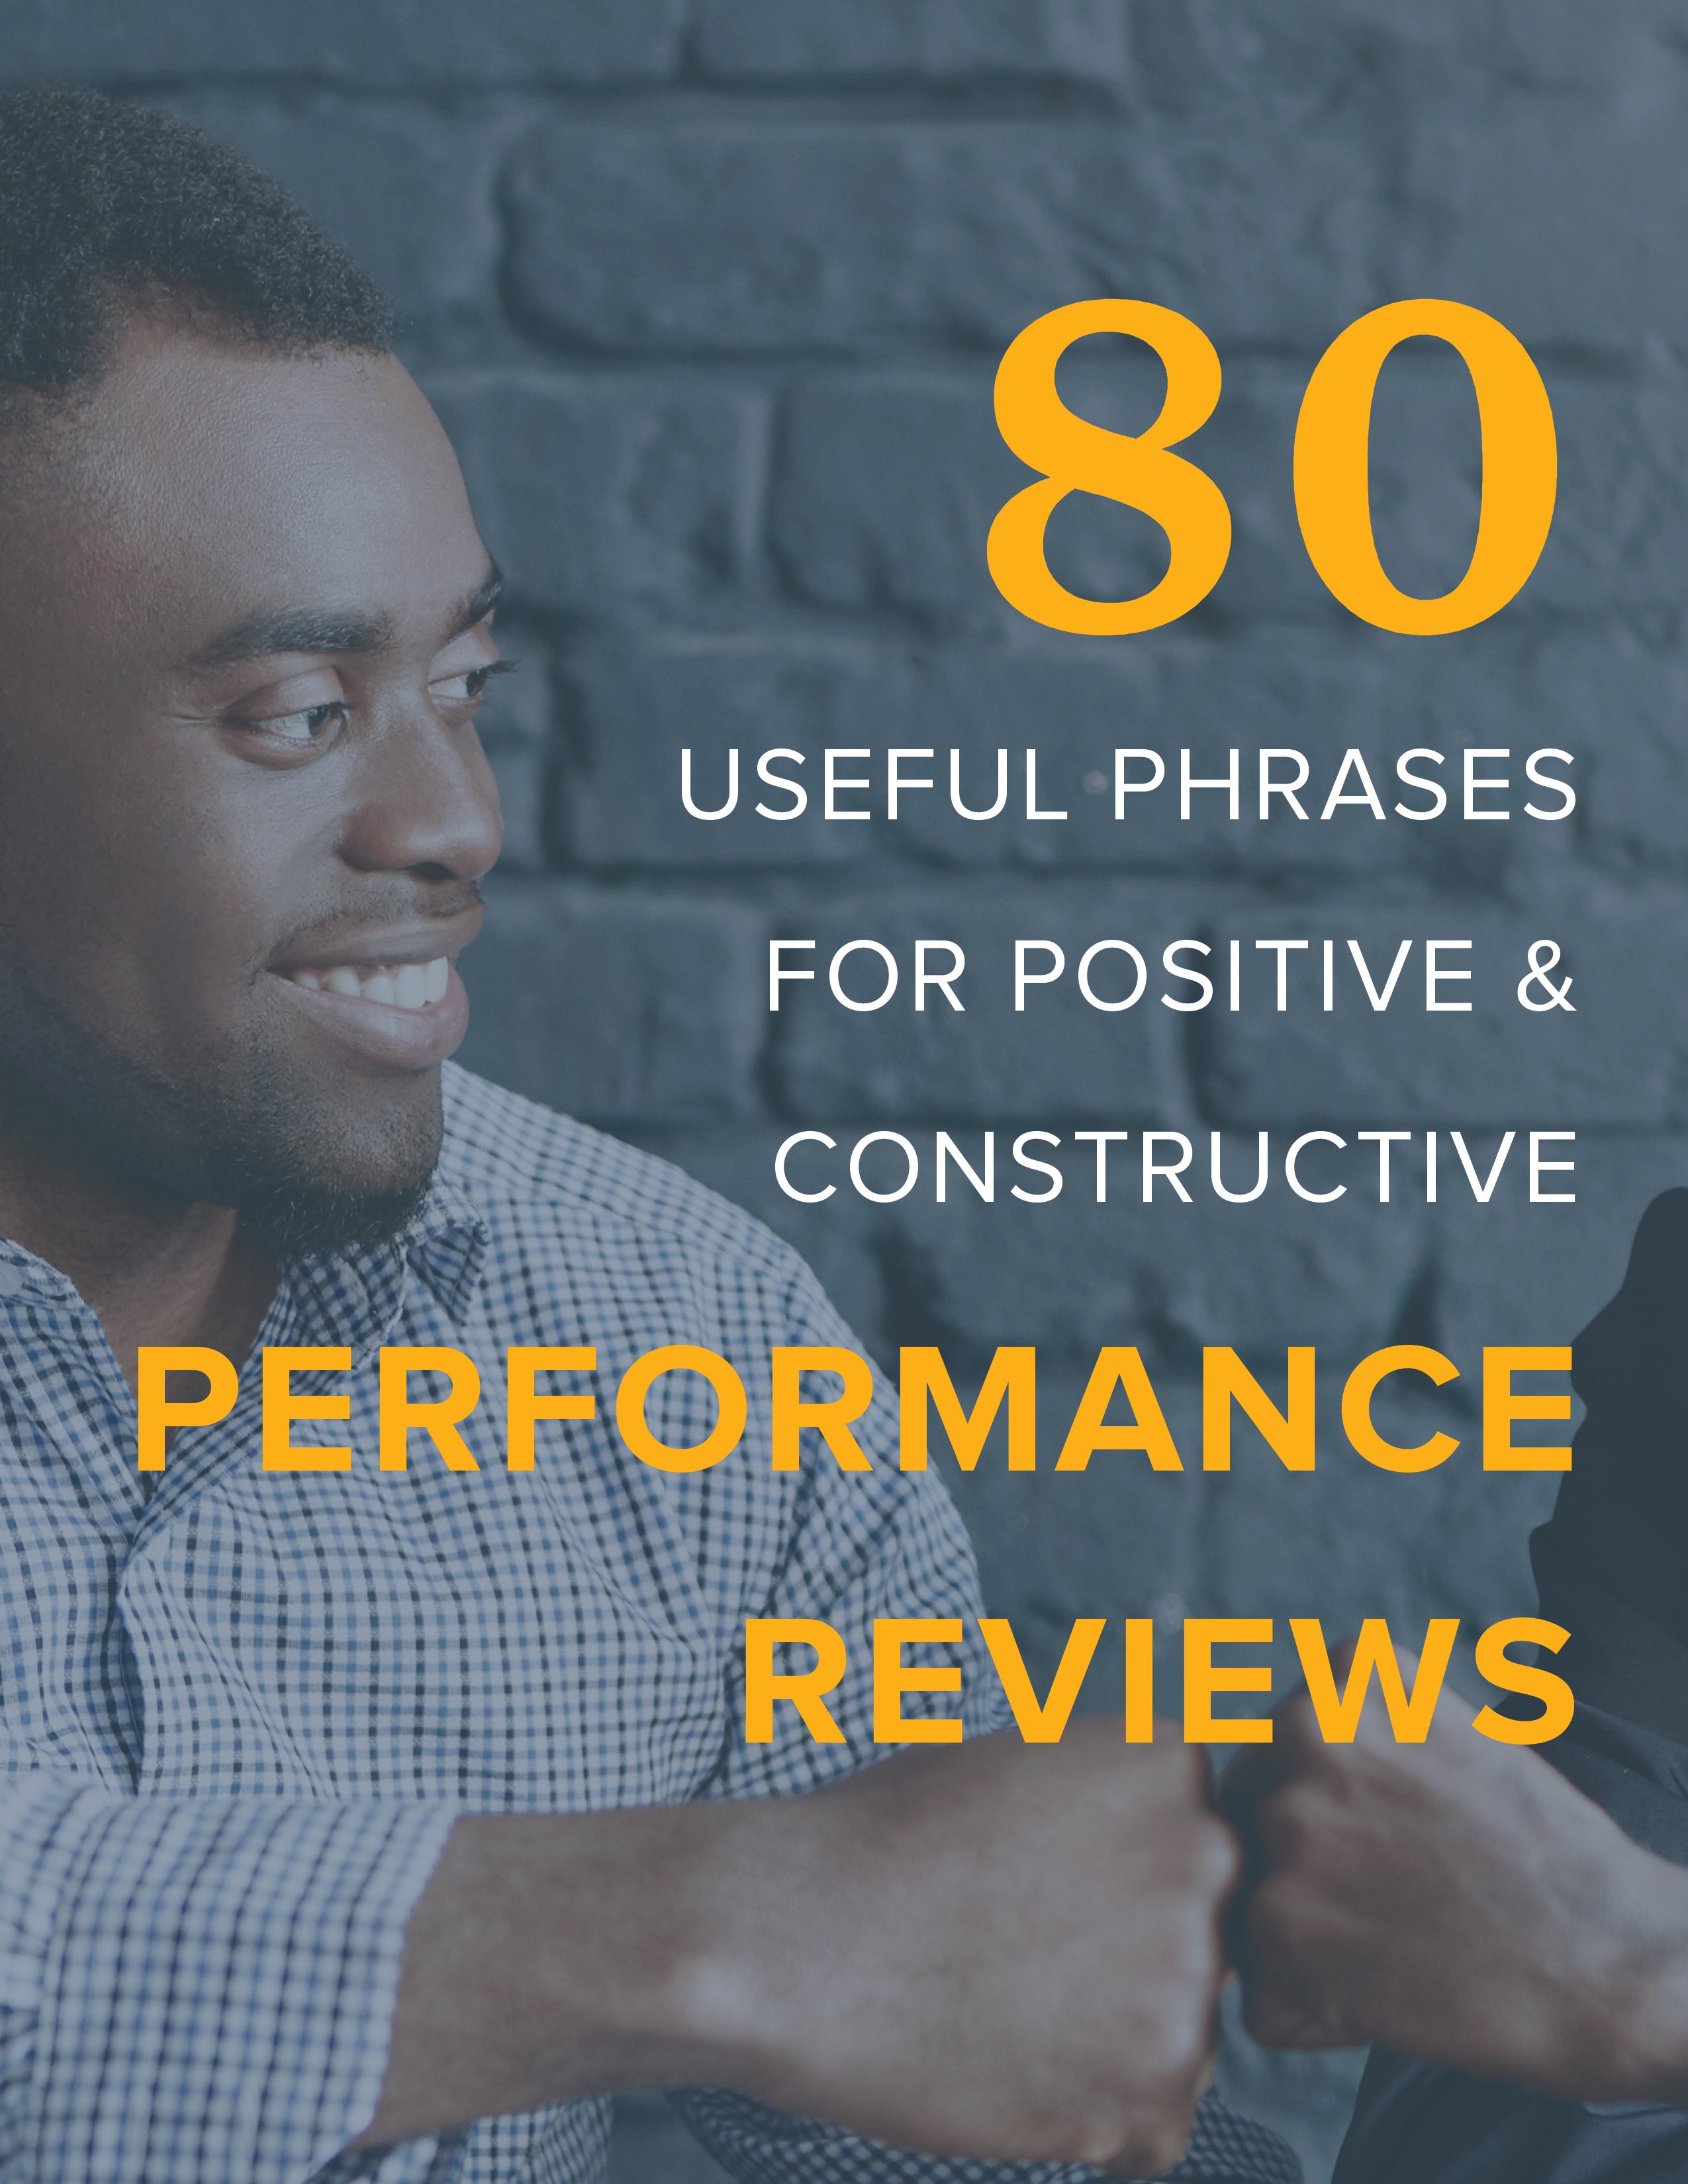 80 Useful Phrases for Positive & Constructive Performance Reviews